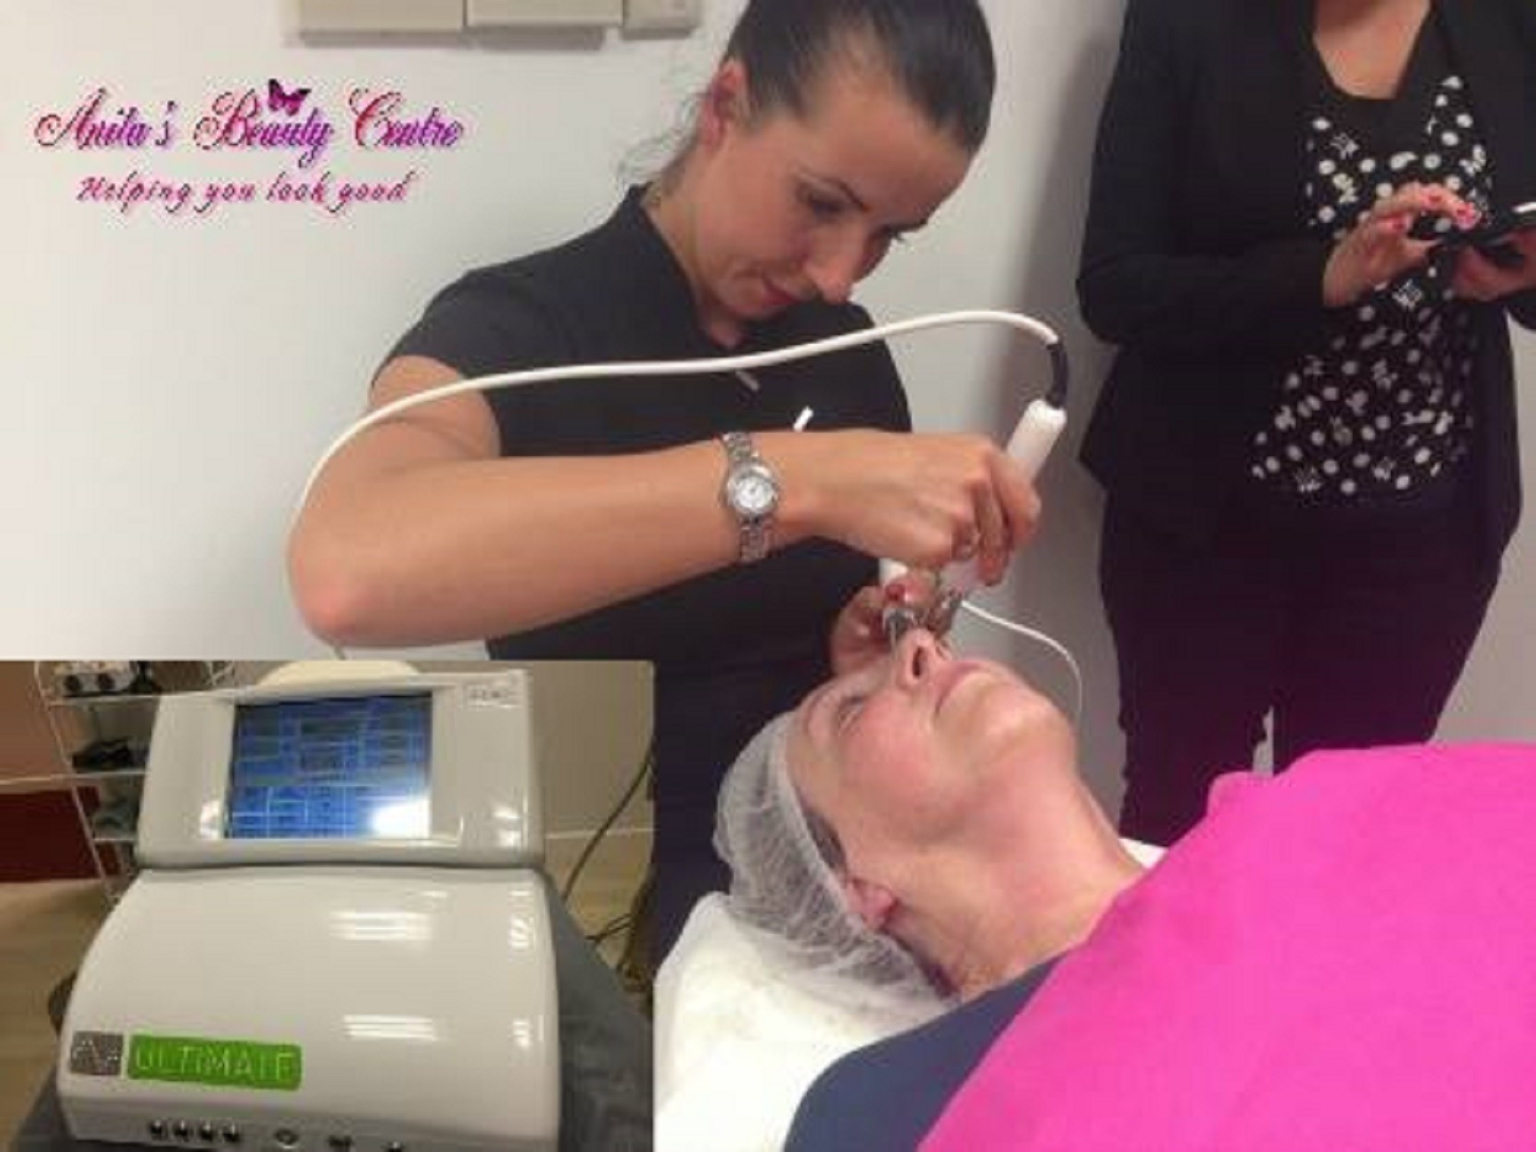 Anitas Beauty Centre Caters For The Milton Keynes Area And Offer High